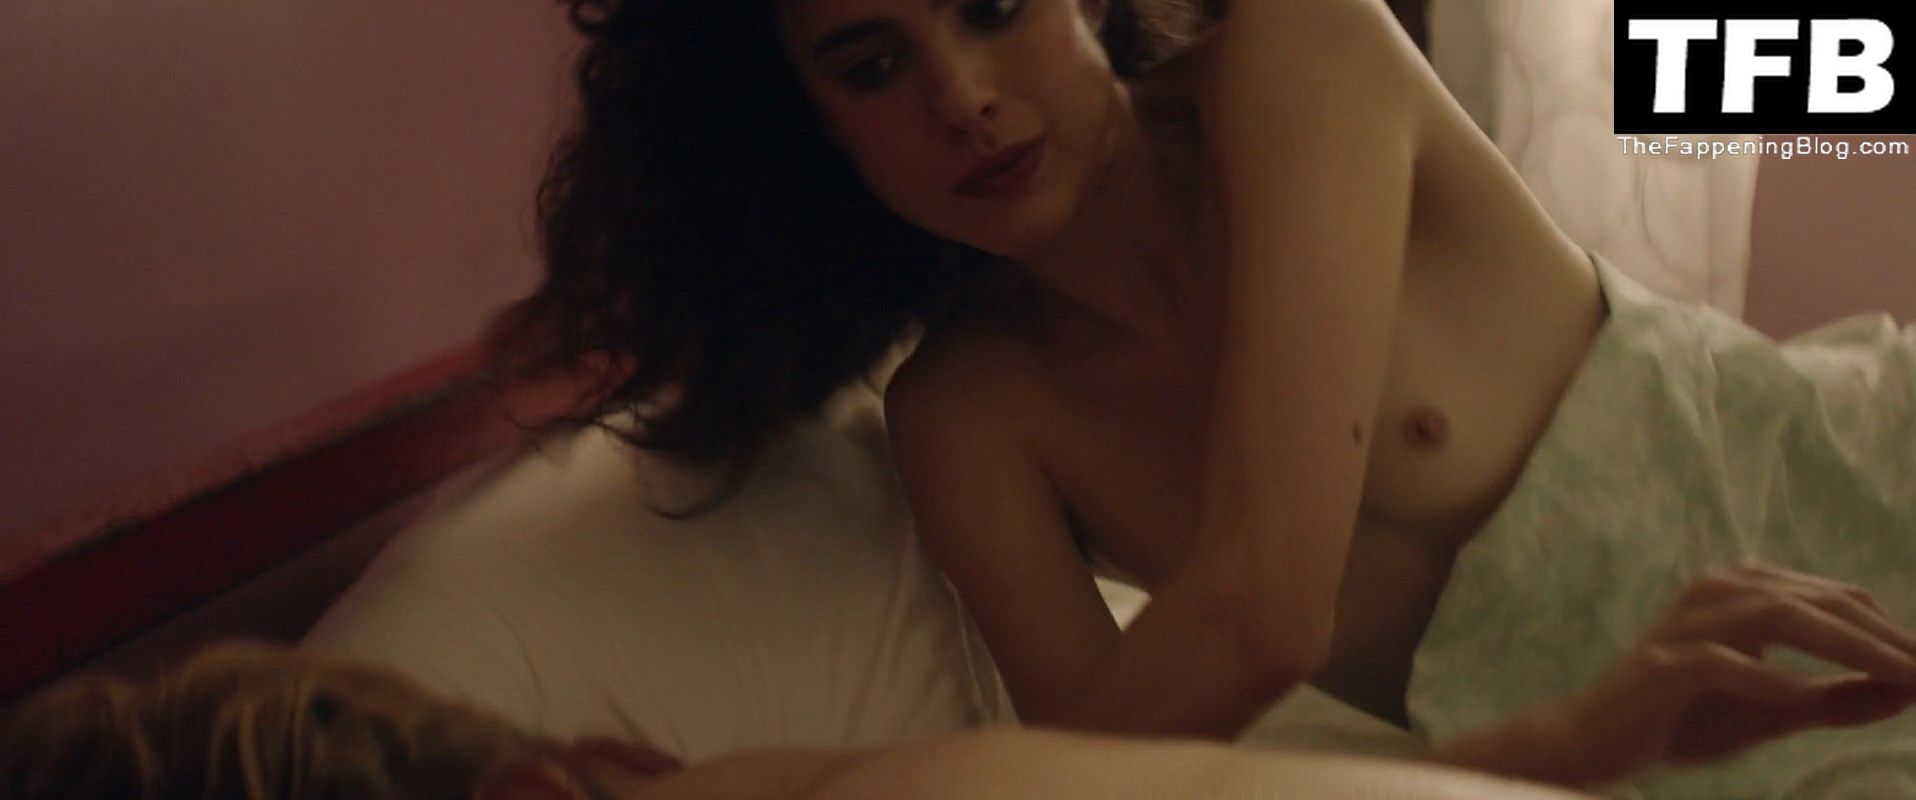 Margaret-Qualley-Nude-Sexy-Stars-at-Noon-The-Fappening-Blog-6.jpg